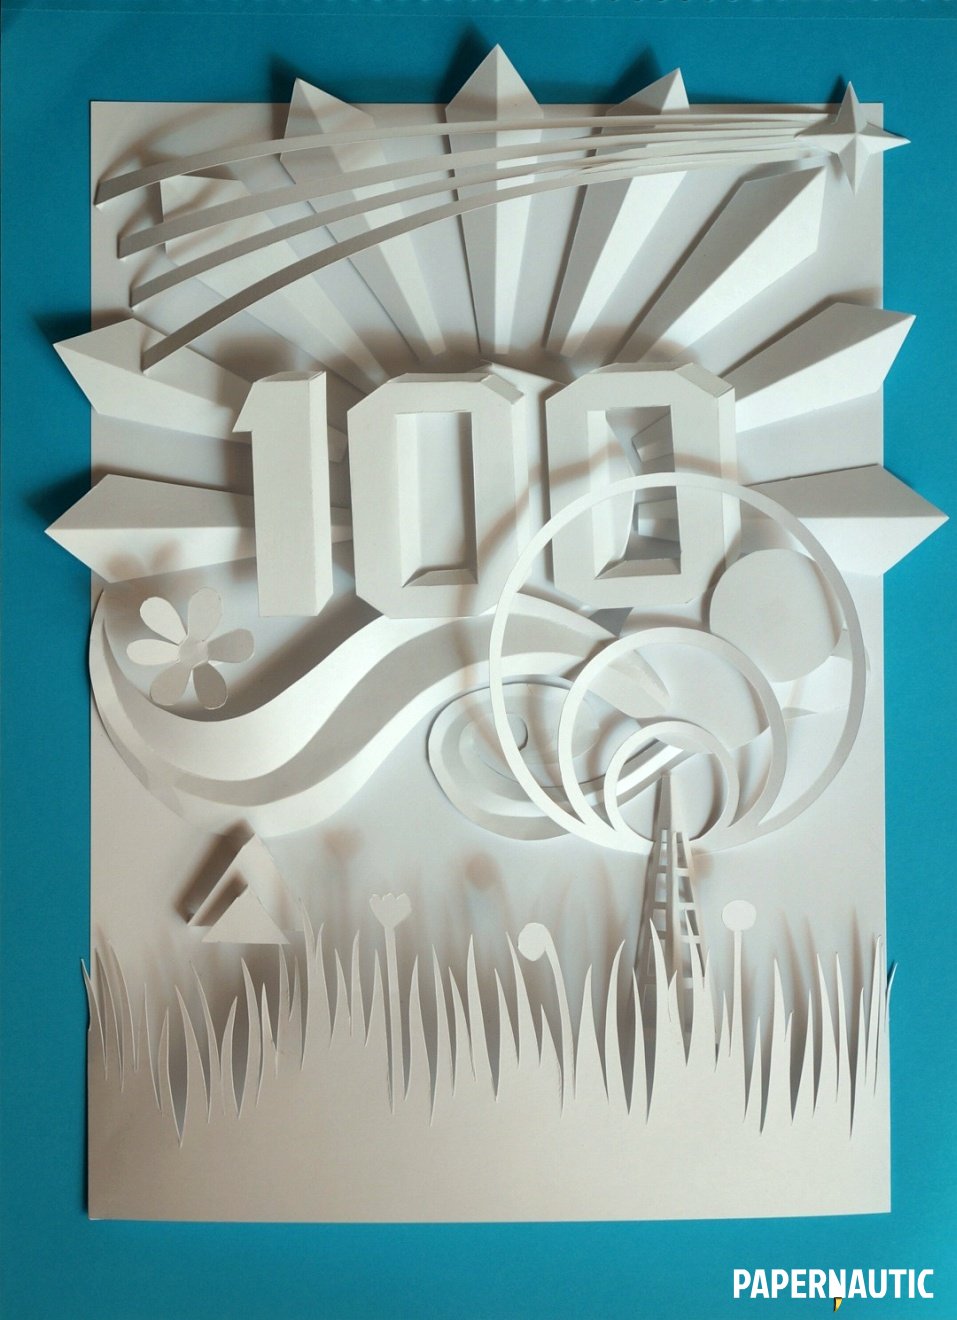 Finished paper relief sculpture in white on a blue paper background